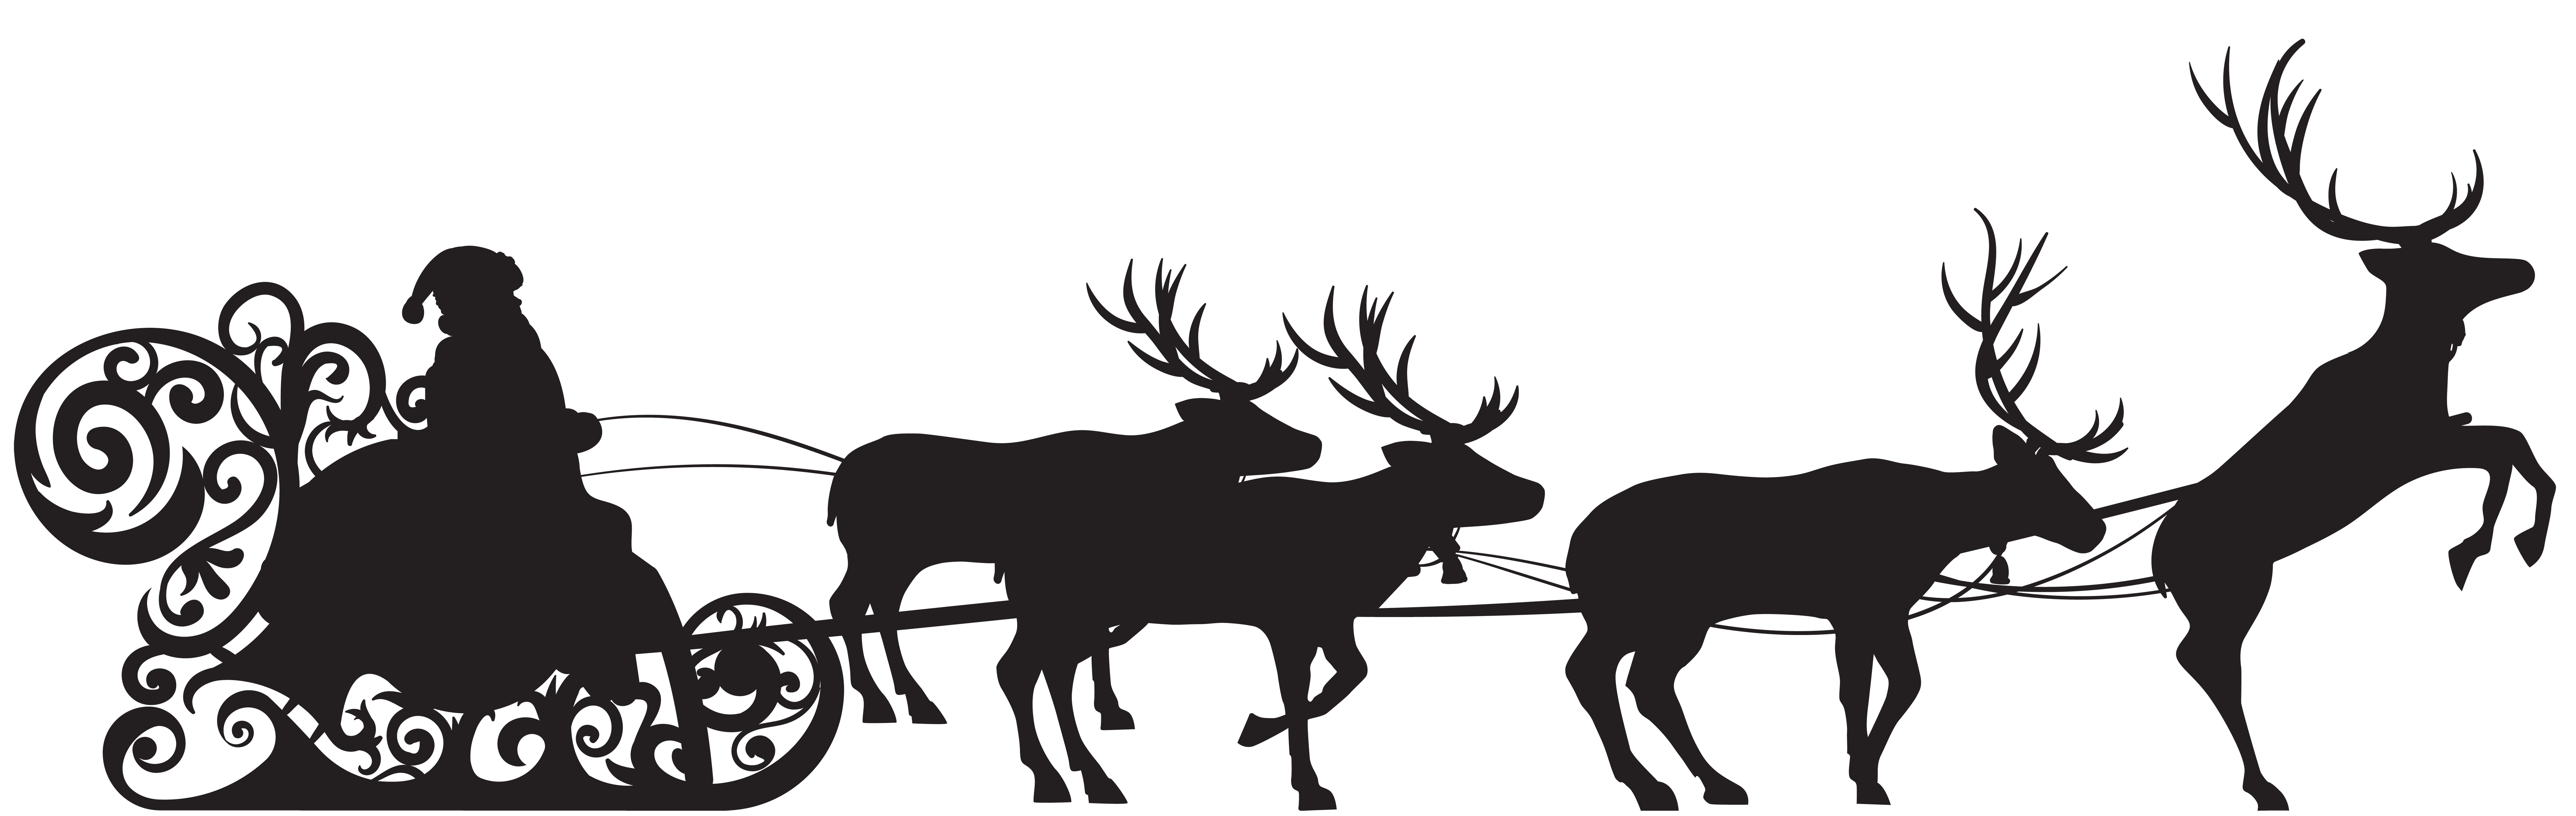 Santa Claus Reindeer Sled Clip Art Santa Claus On Sled Silhouette Png Clip Art Image Png